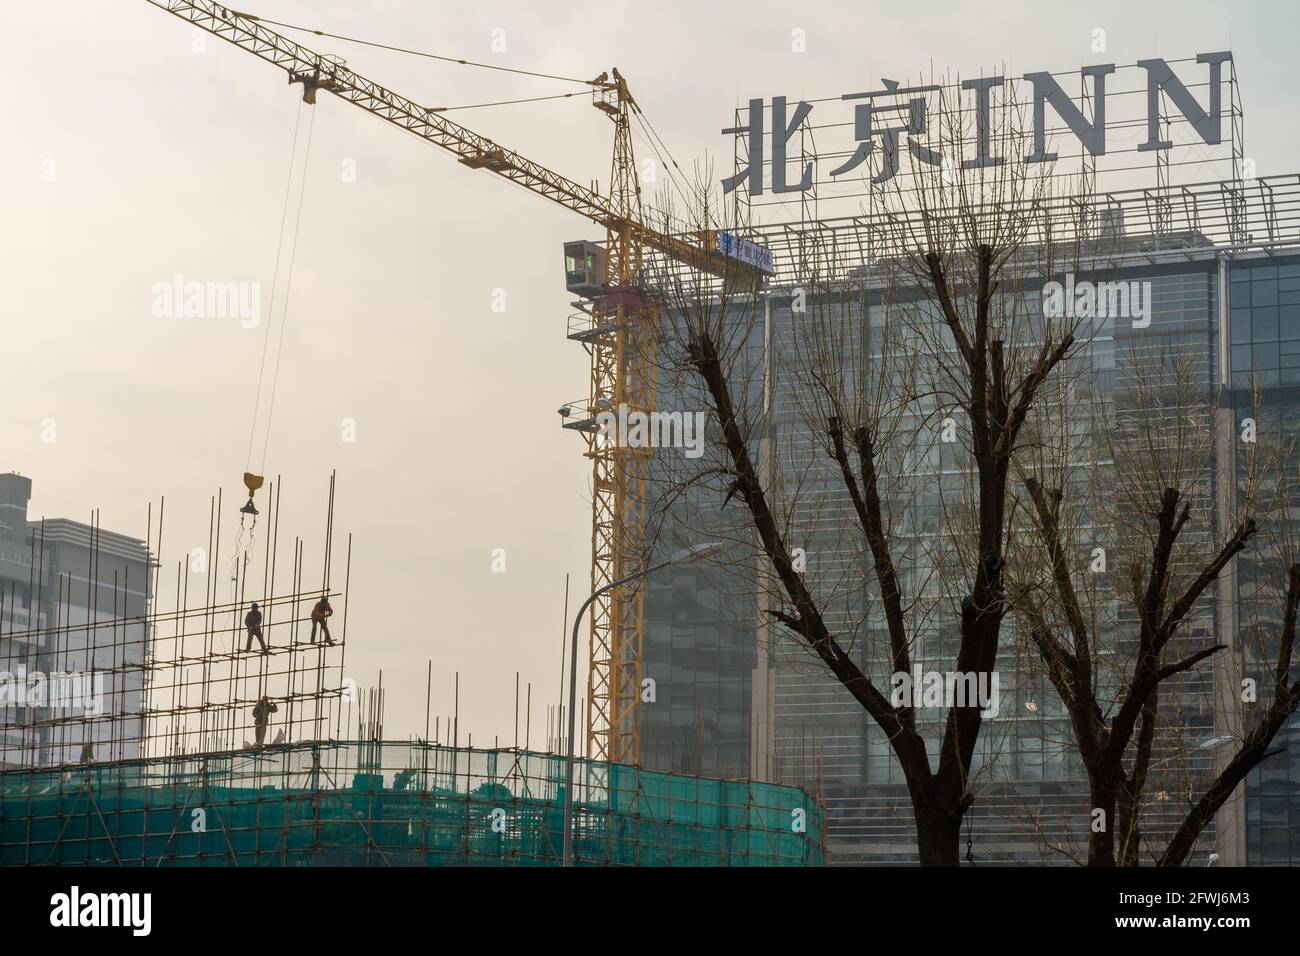 Beijing, China - January 17, 2015: Construction workers working on scaffolding at a construction site in Beijing Stock Photo